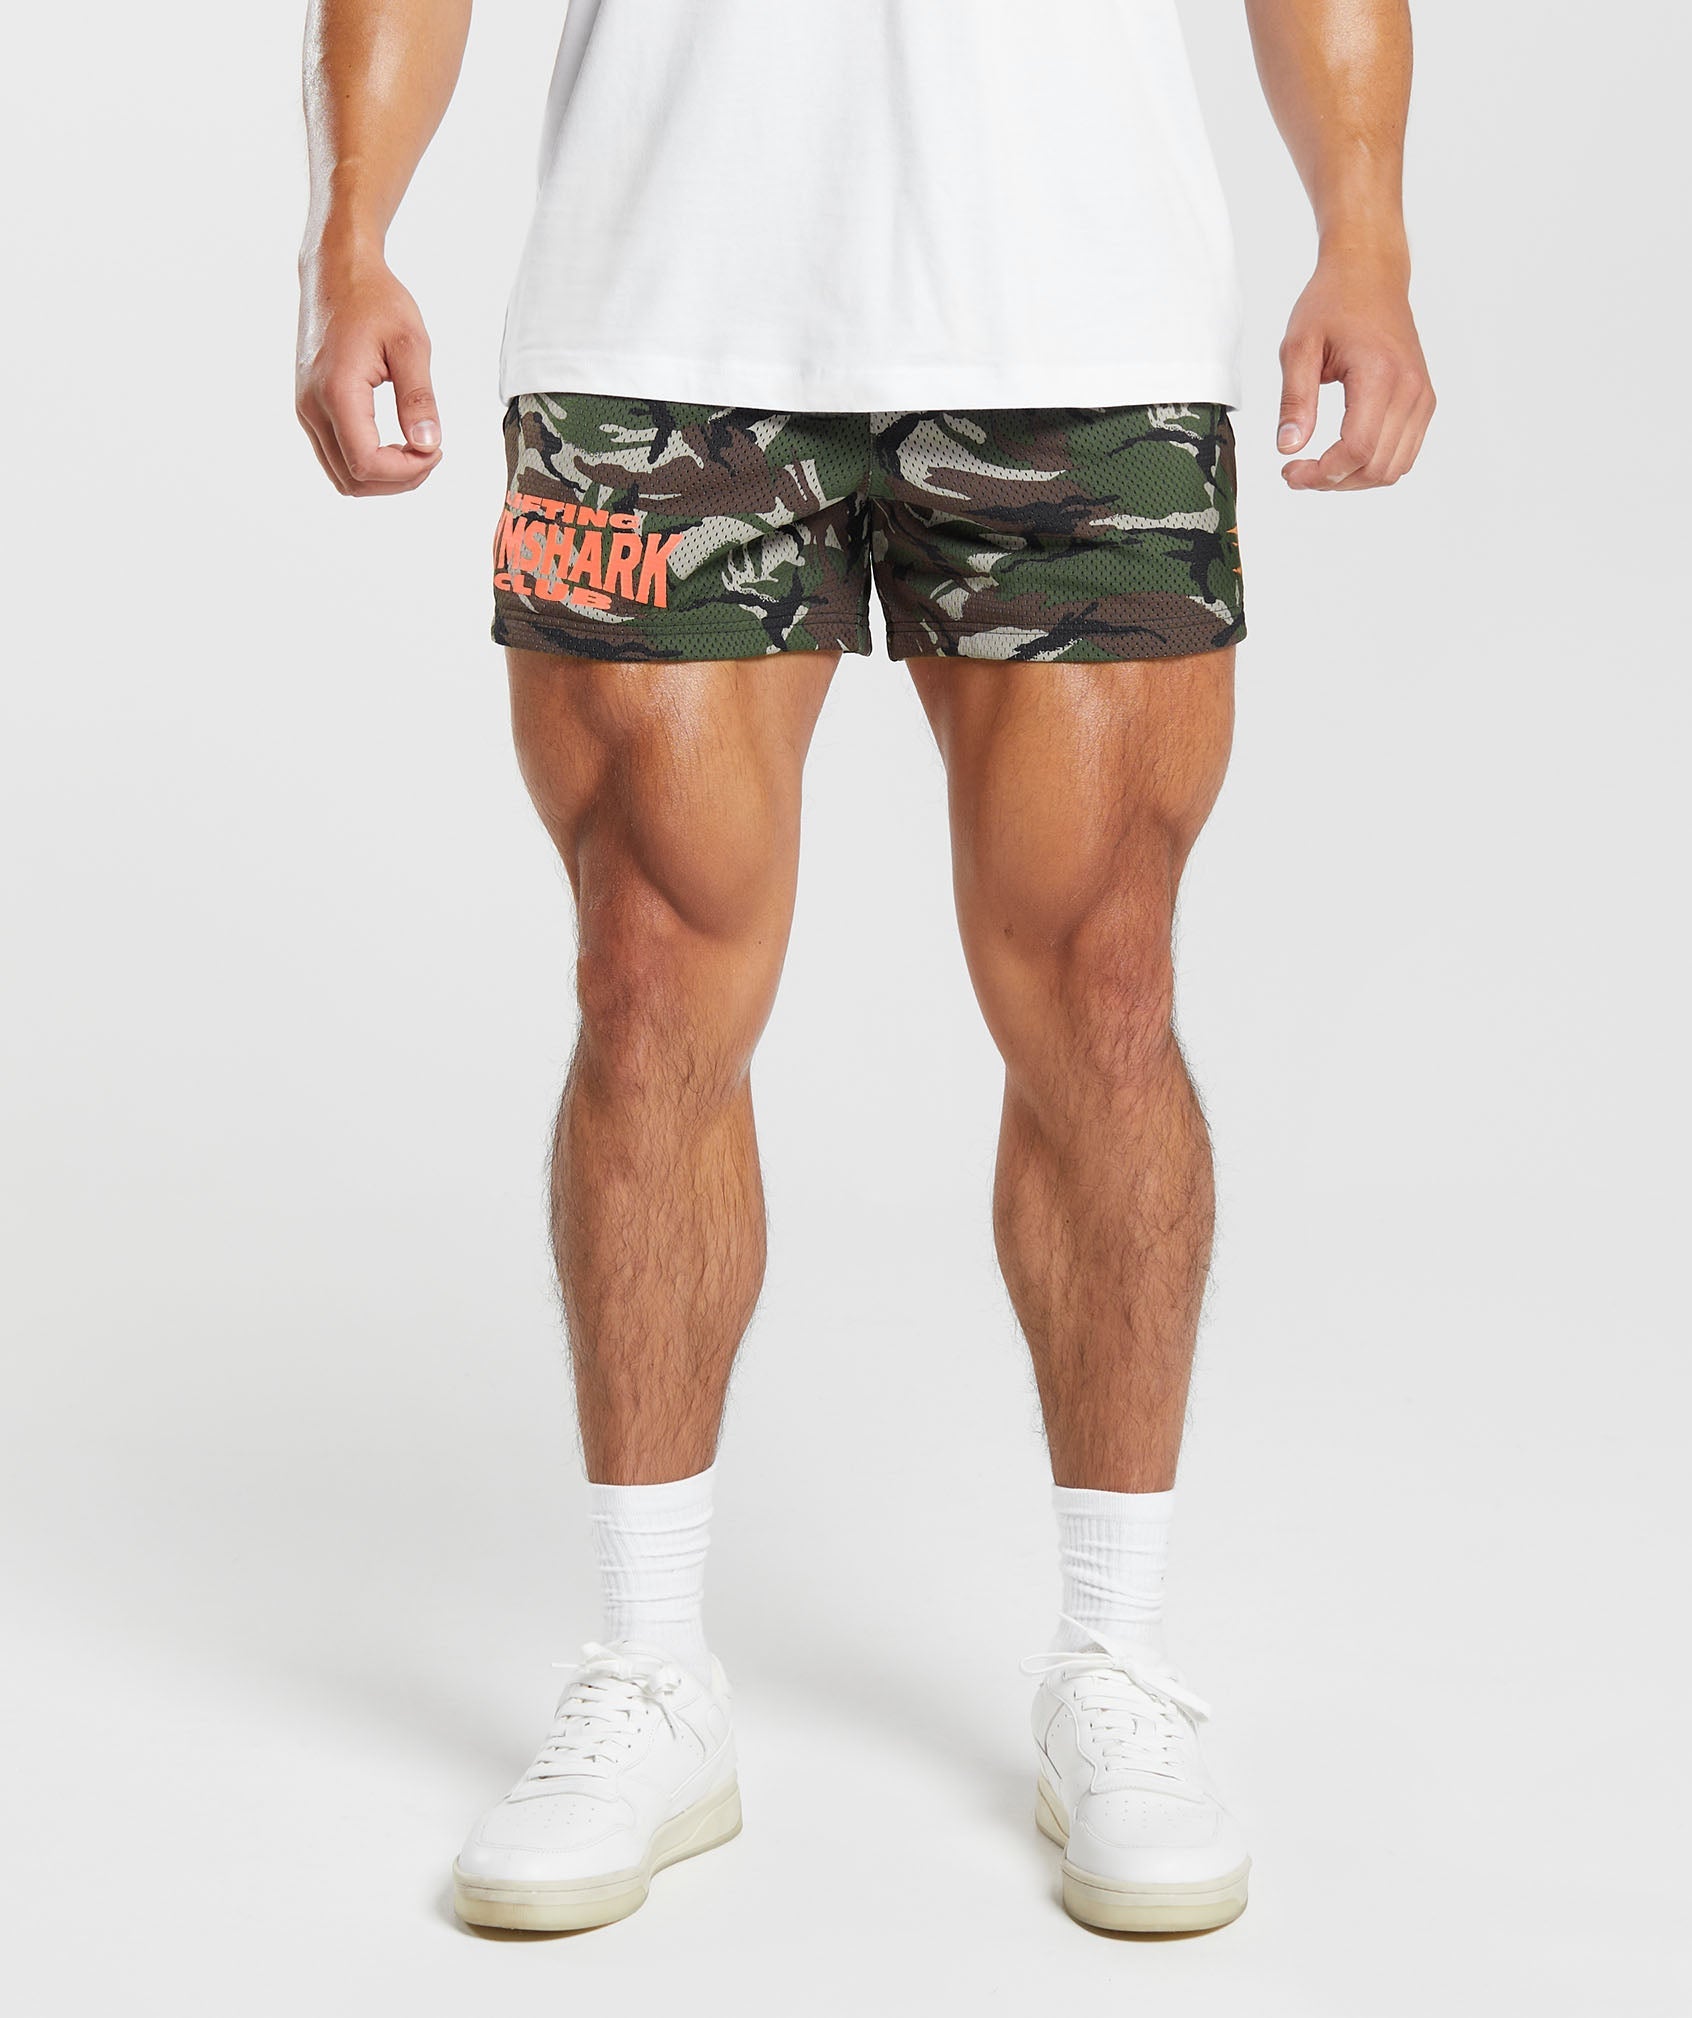 Lifting Club Printed Mesh 5" Shorts in Winter Olive - view 1